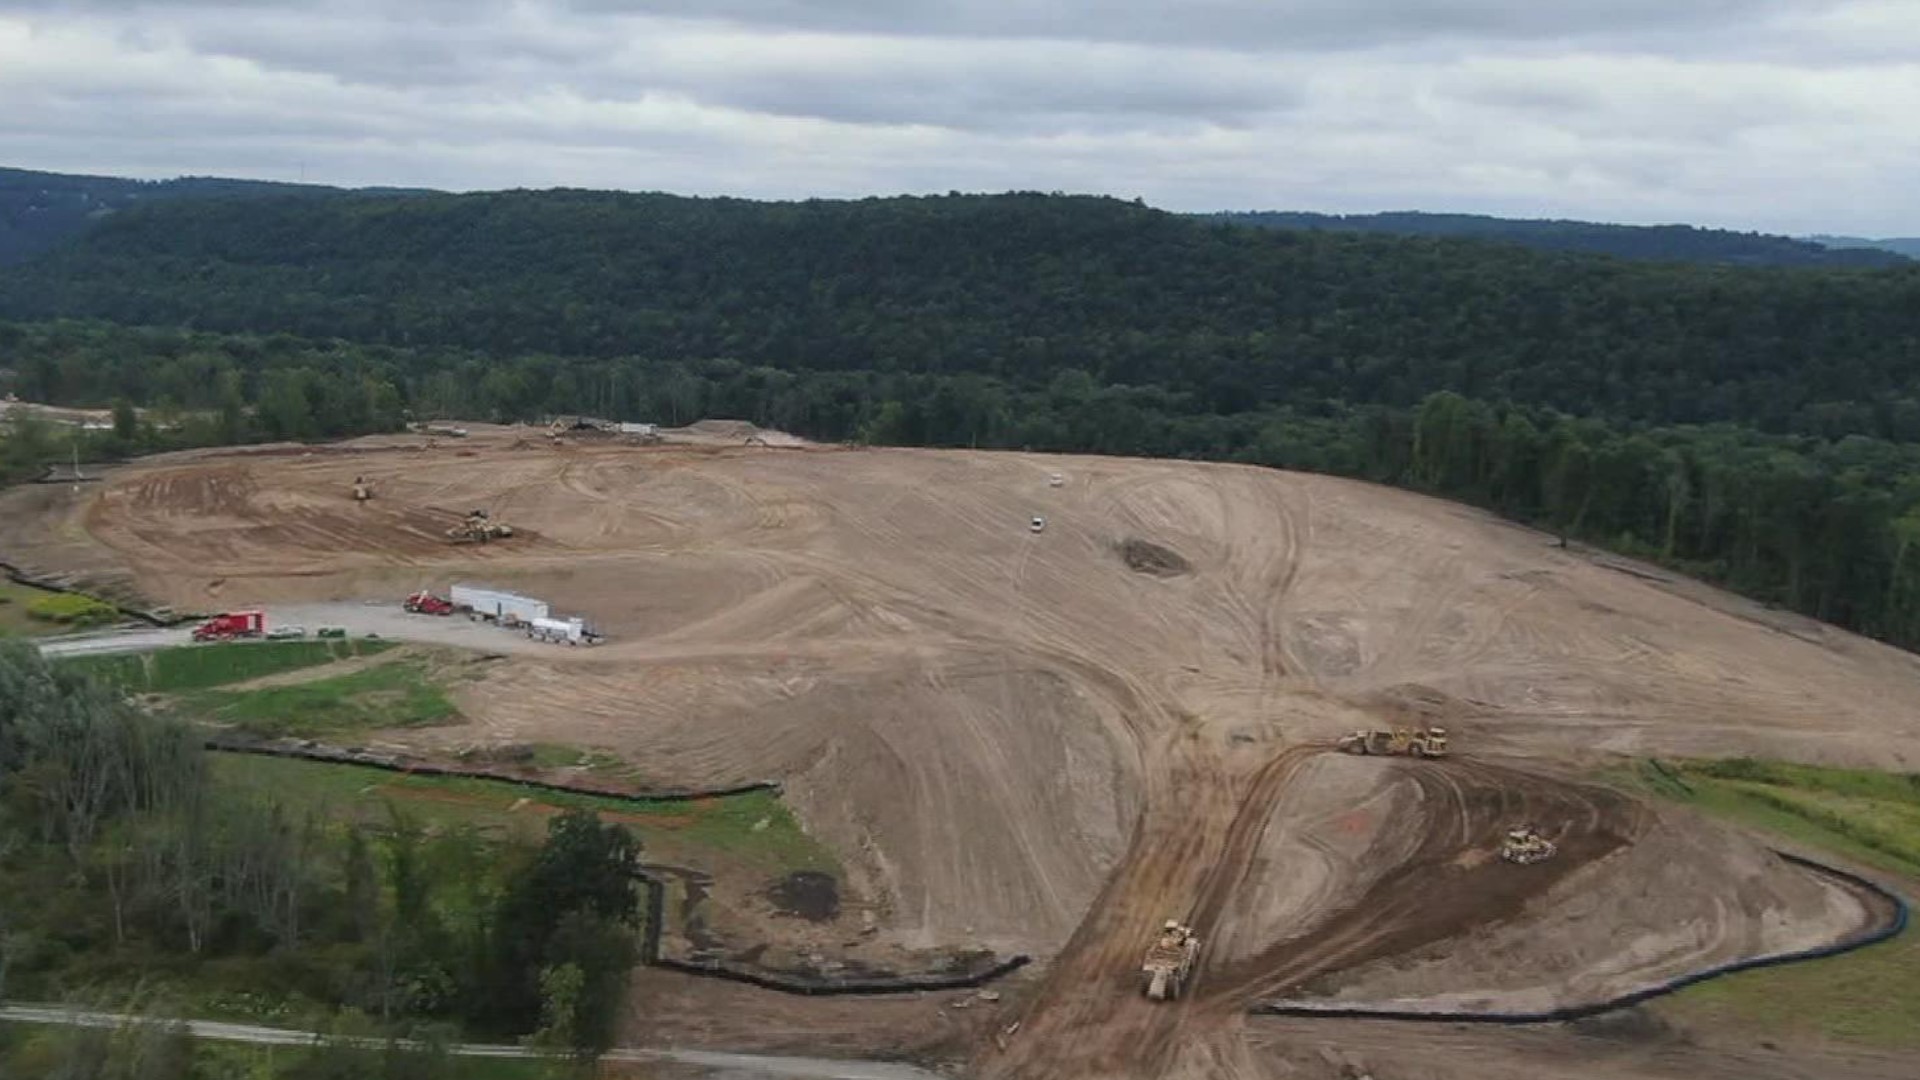 An $800 million project in Bradford County is now in jeopardy.